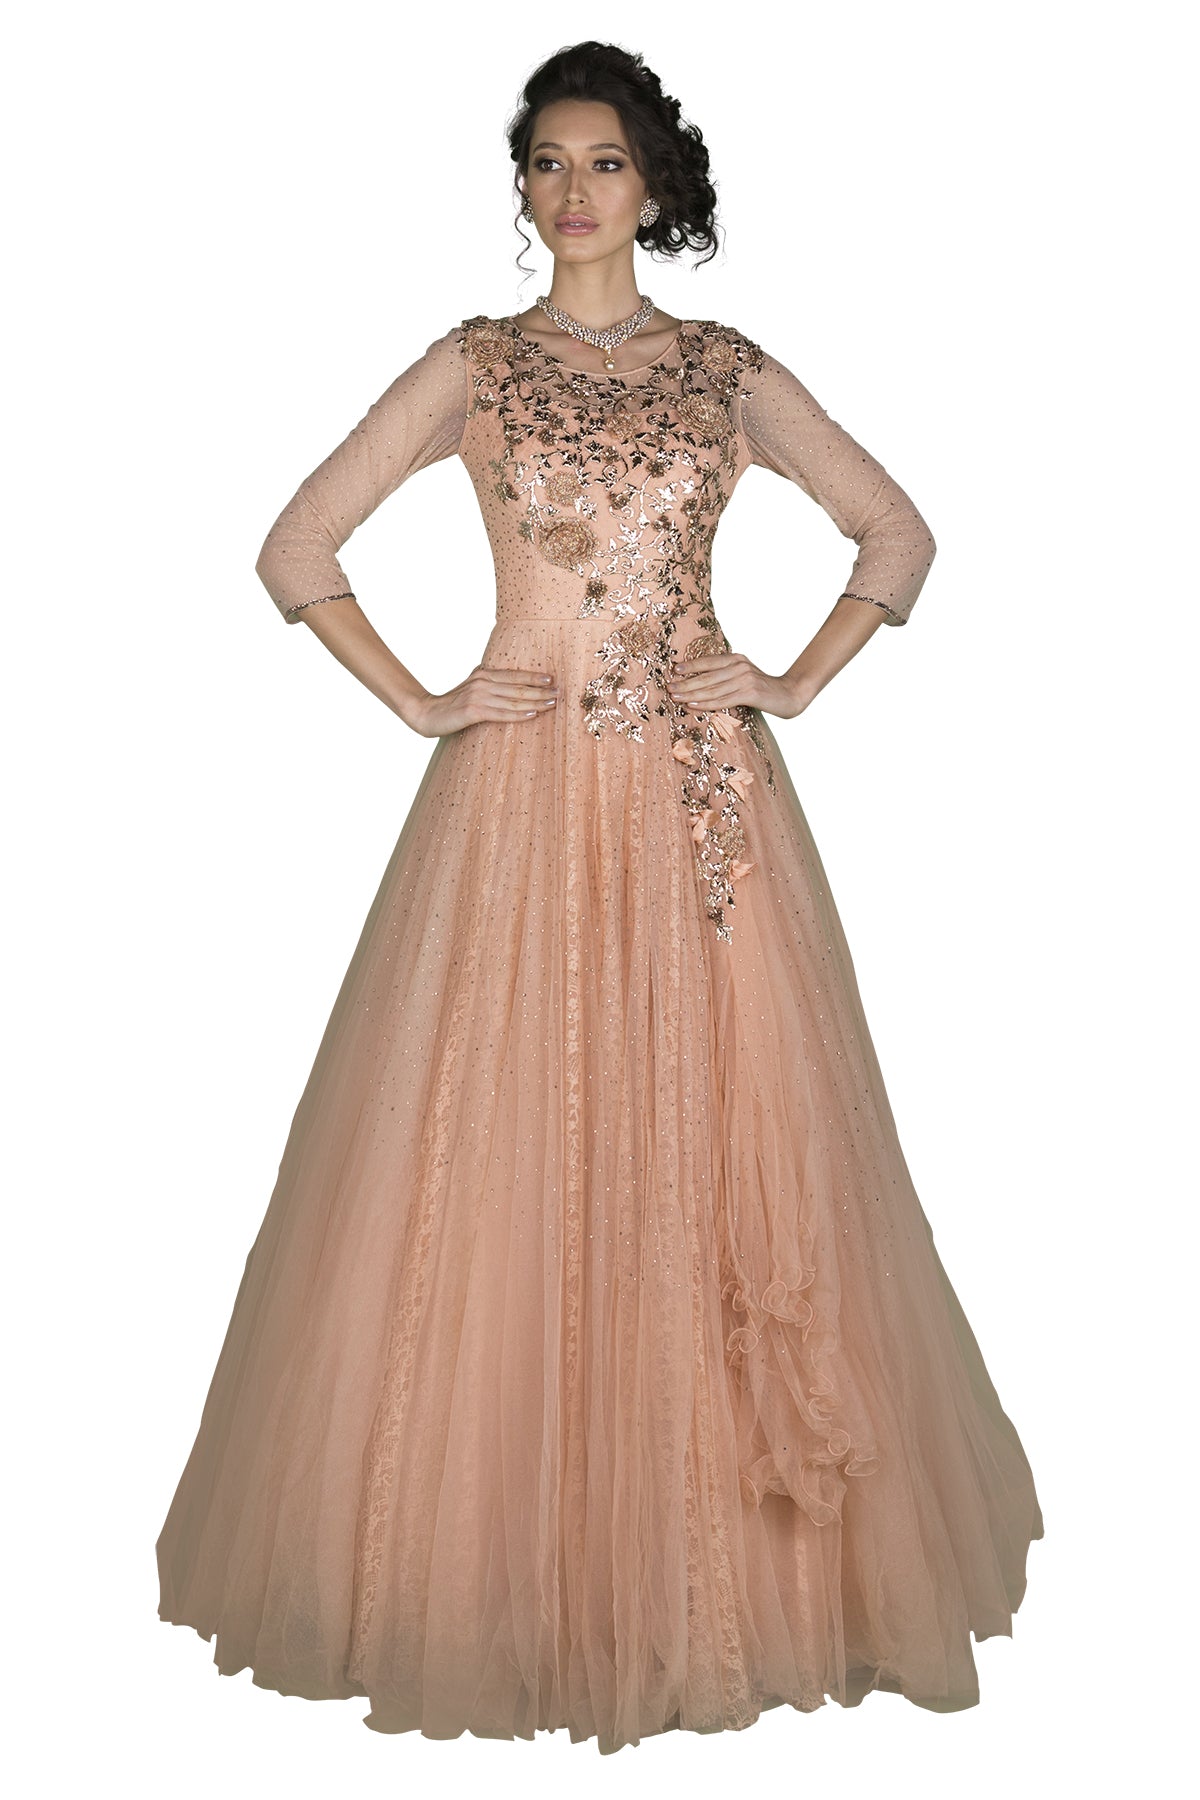 Leave them peachless in this delicate floor length embellished gown fit for a diva and her special day!